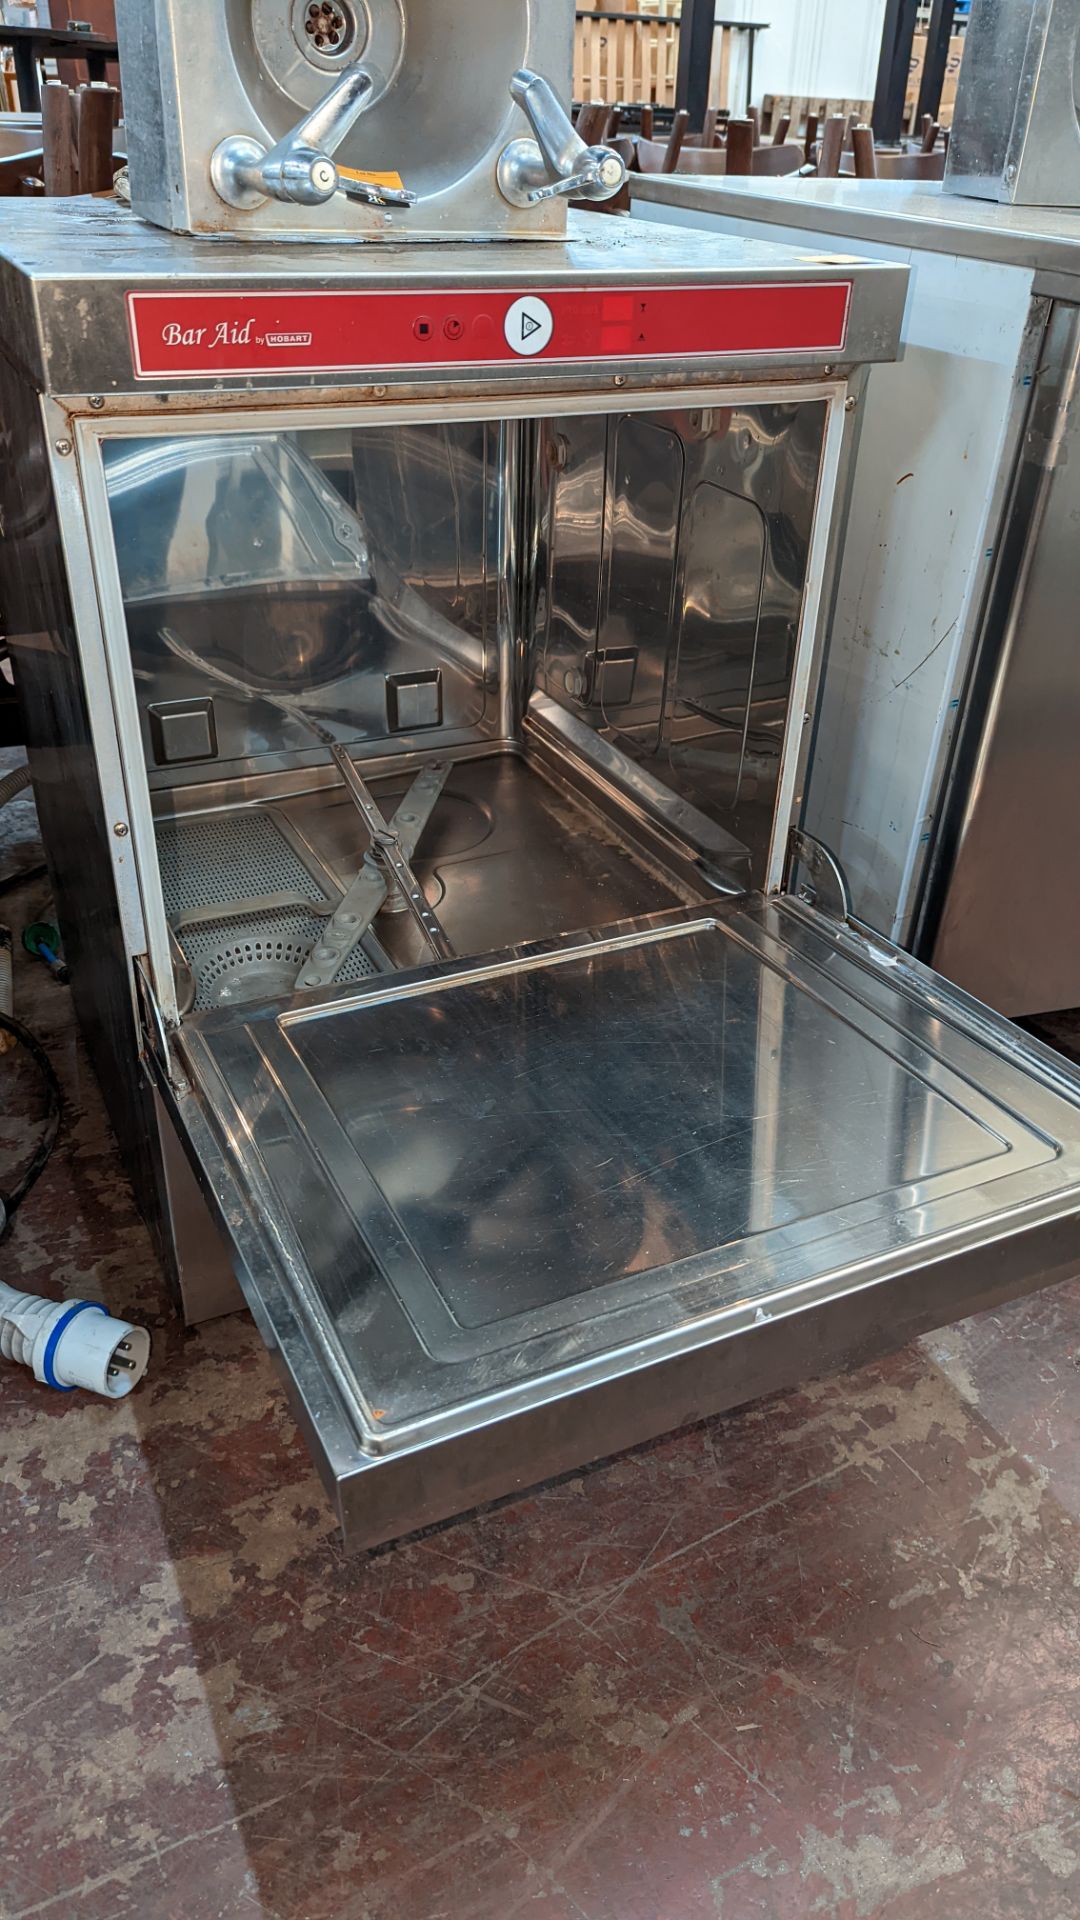 Hobart Bar Aid stainless steel glasswasher - Image 5 of 9